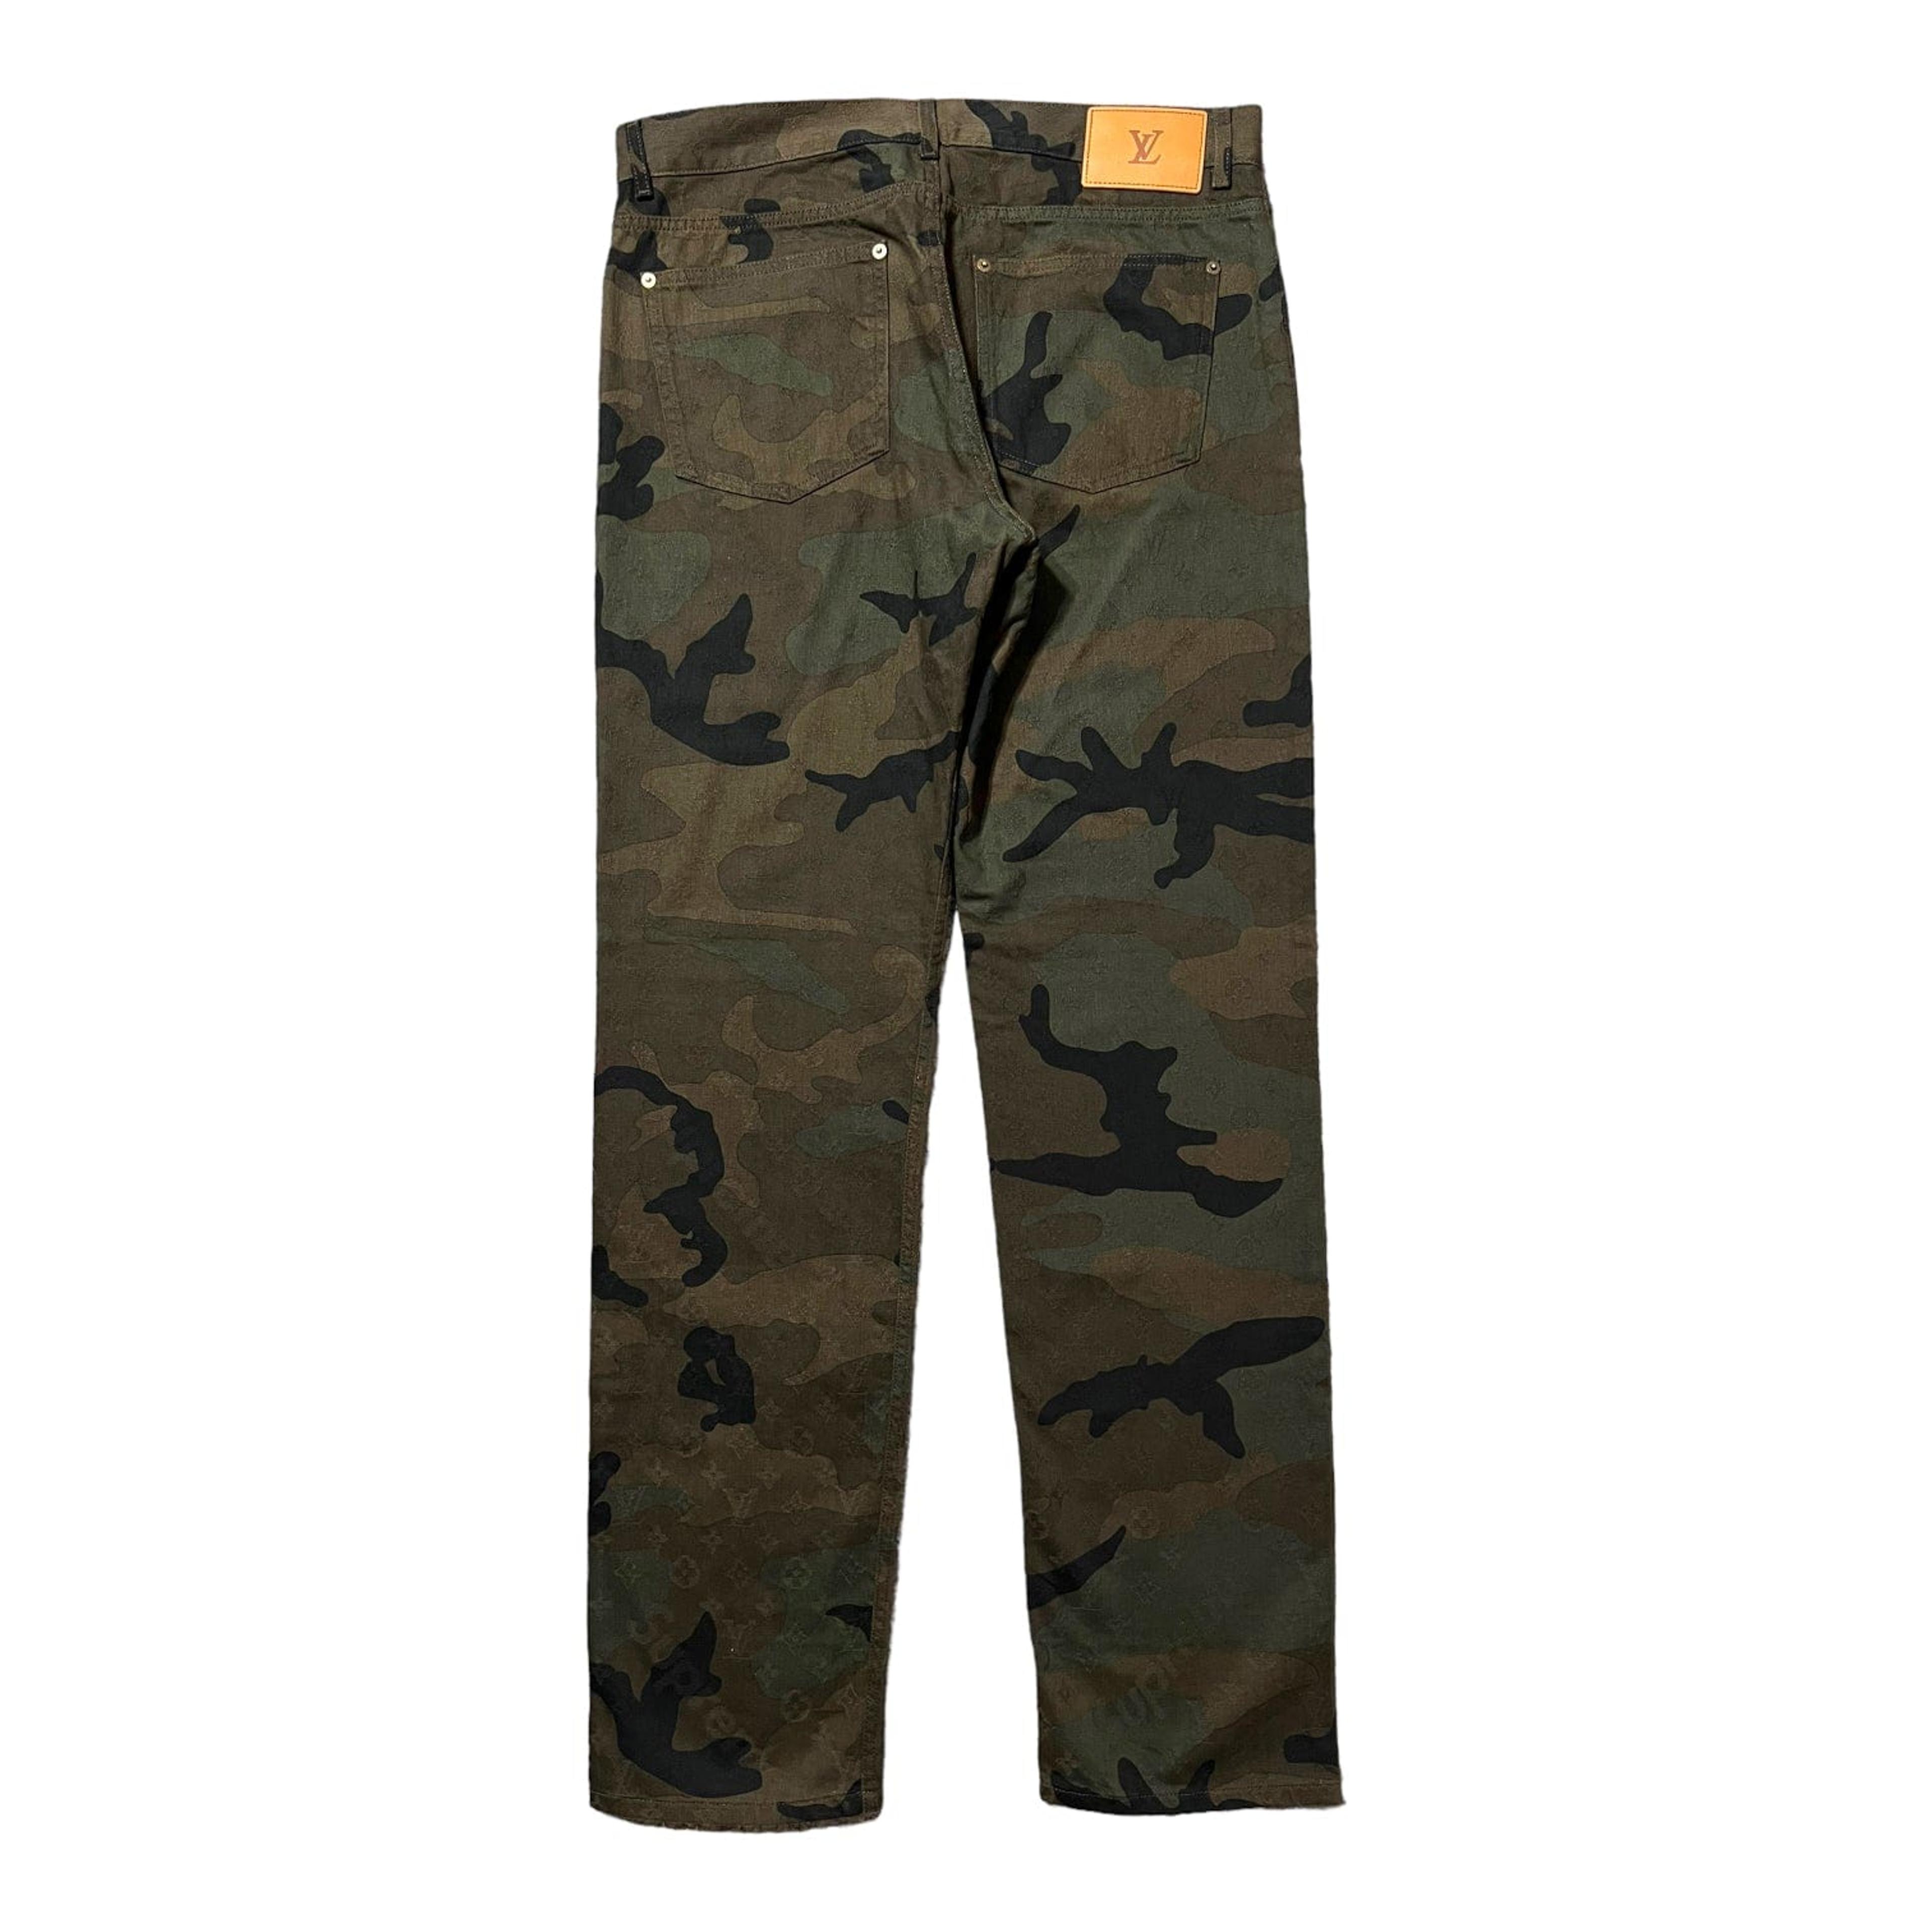 Alternate View 1 of Supreme x Louis Vuitton Jacquard Jeans Camouflage